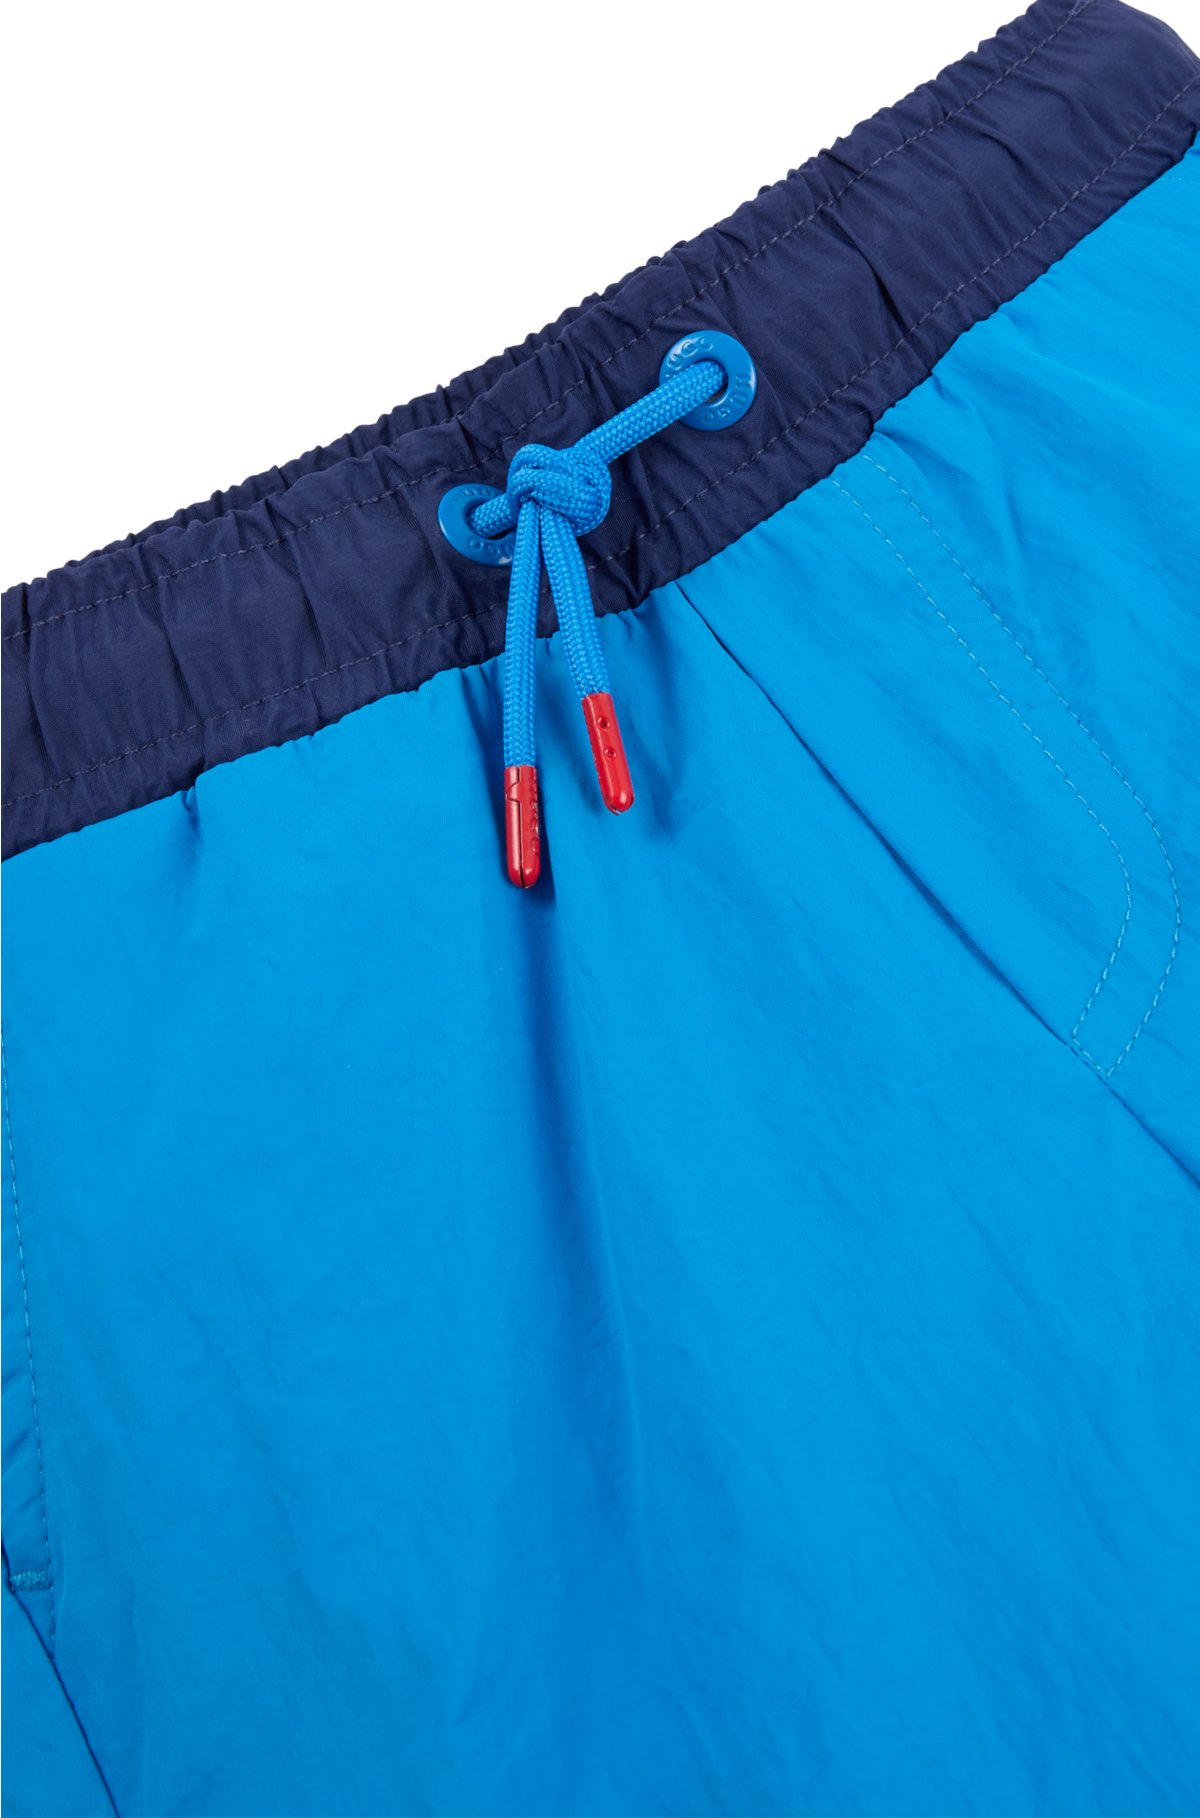 Kids' quick-dry swim shorts with vertical logo, Blue